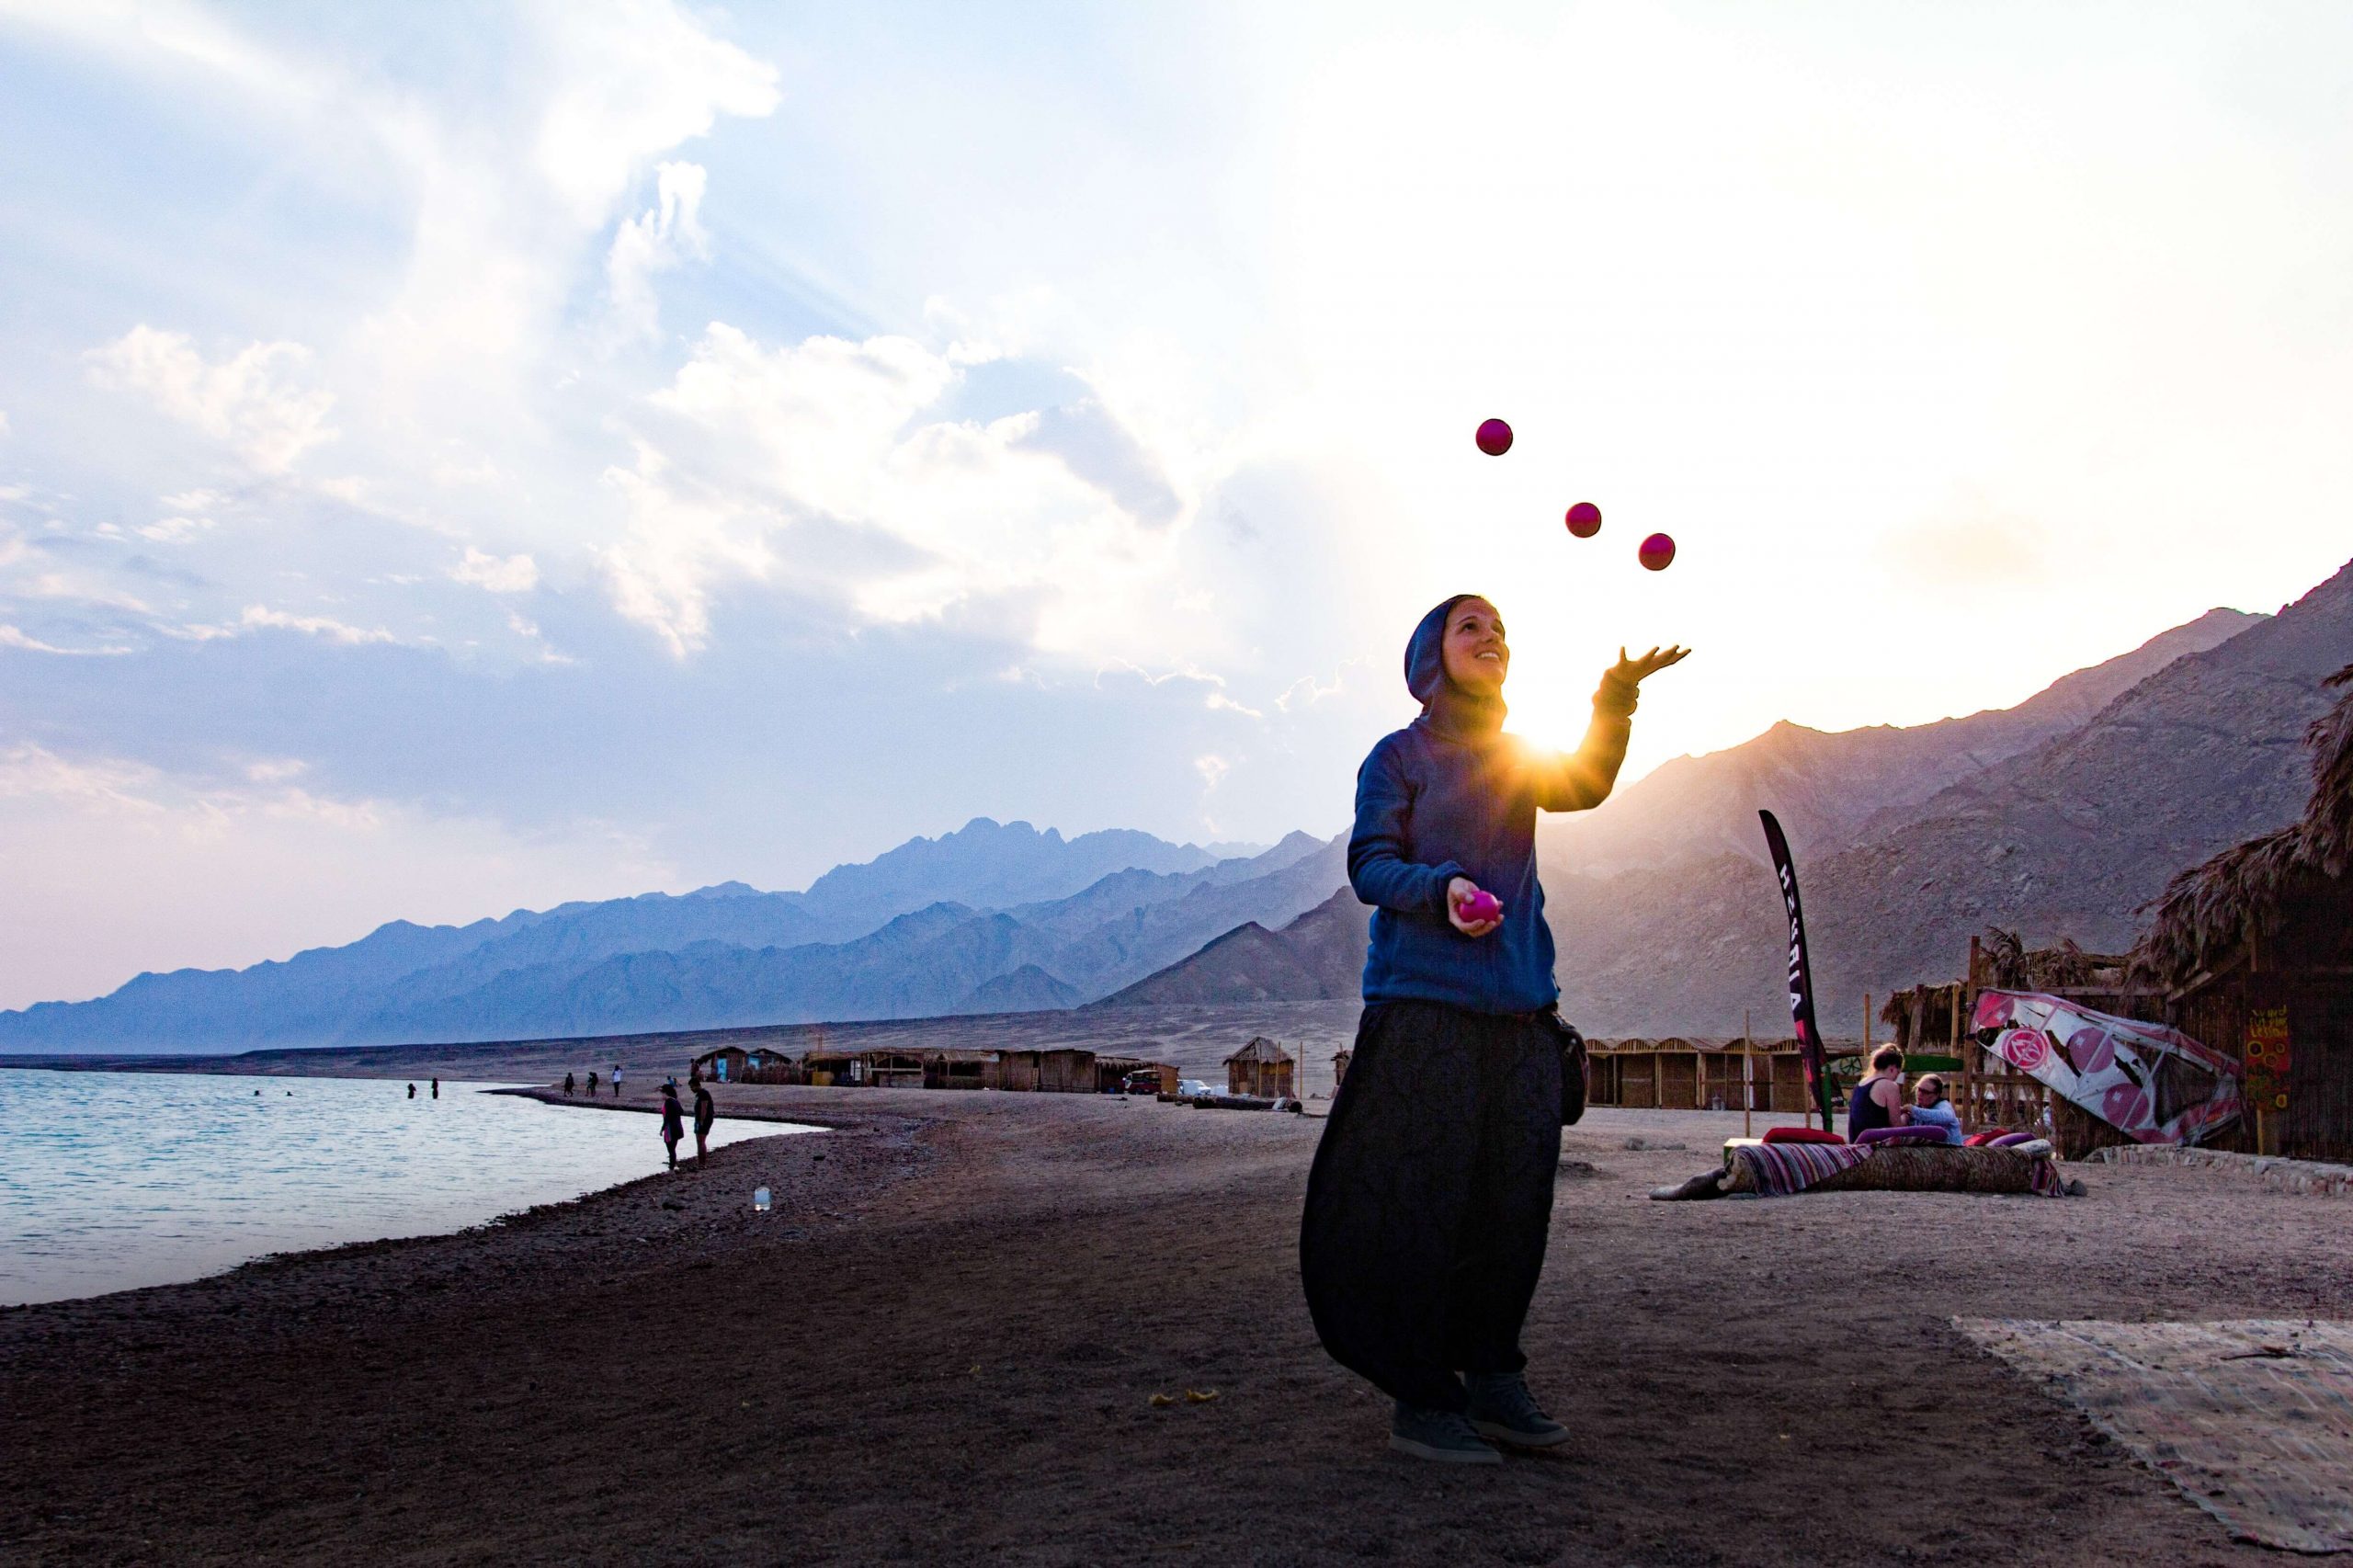 woman performing a juggling act